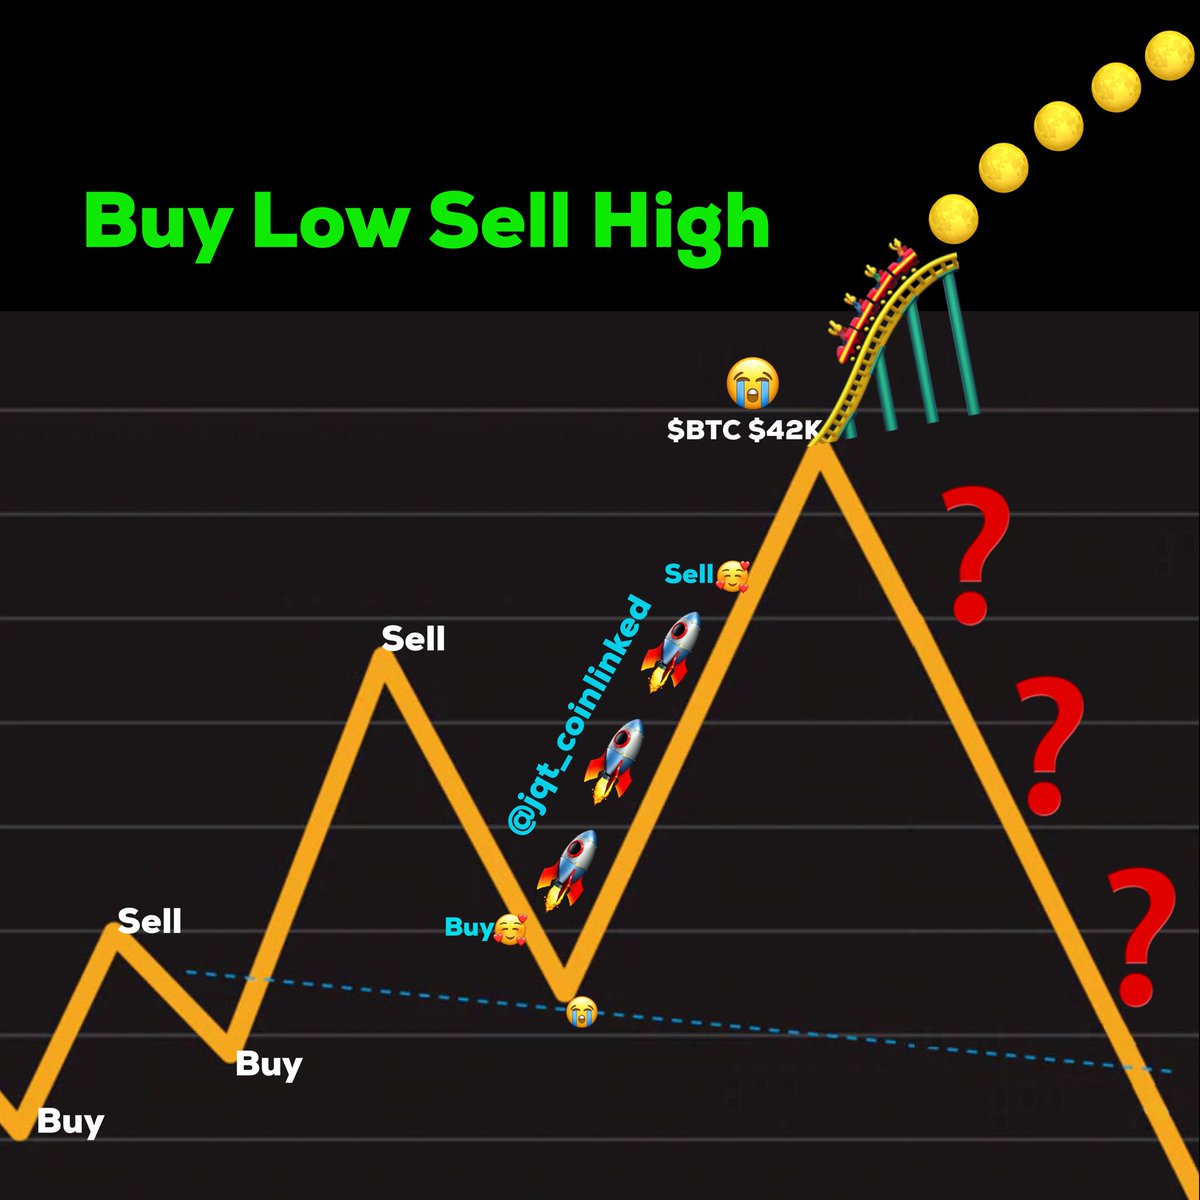 6/ They say bulls make money, bears make money, and pigs get slaughtered. Lol  Then there’s the Buy Low Sell High. I don’t aim for the lowest & highest points, my comfort zone is(). Things could go lower after I buy or higher after I sell, but a profit is a profit. 